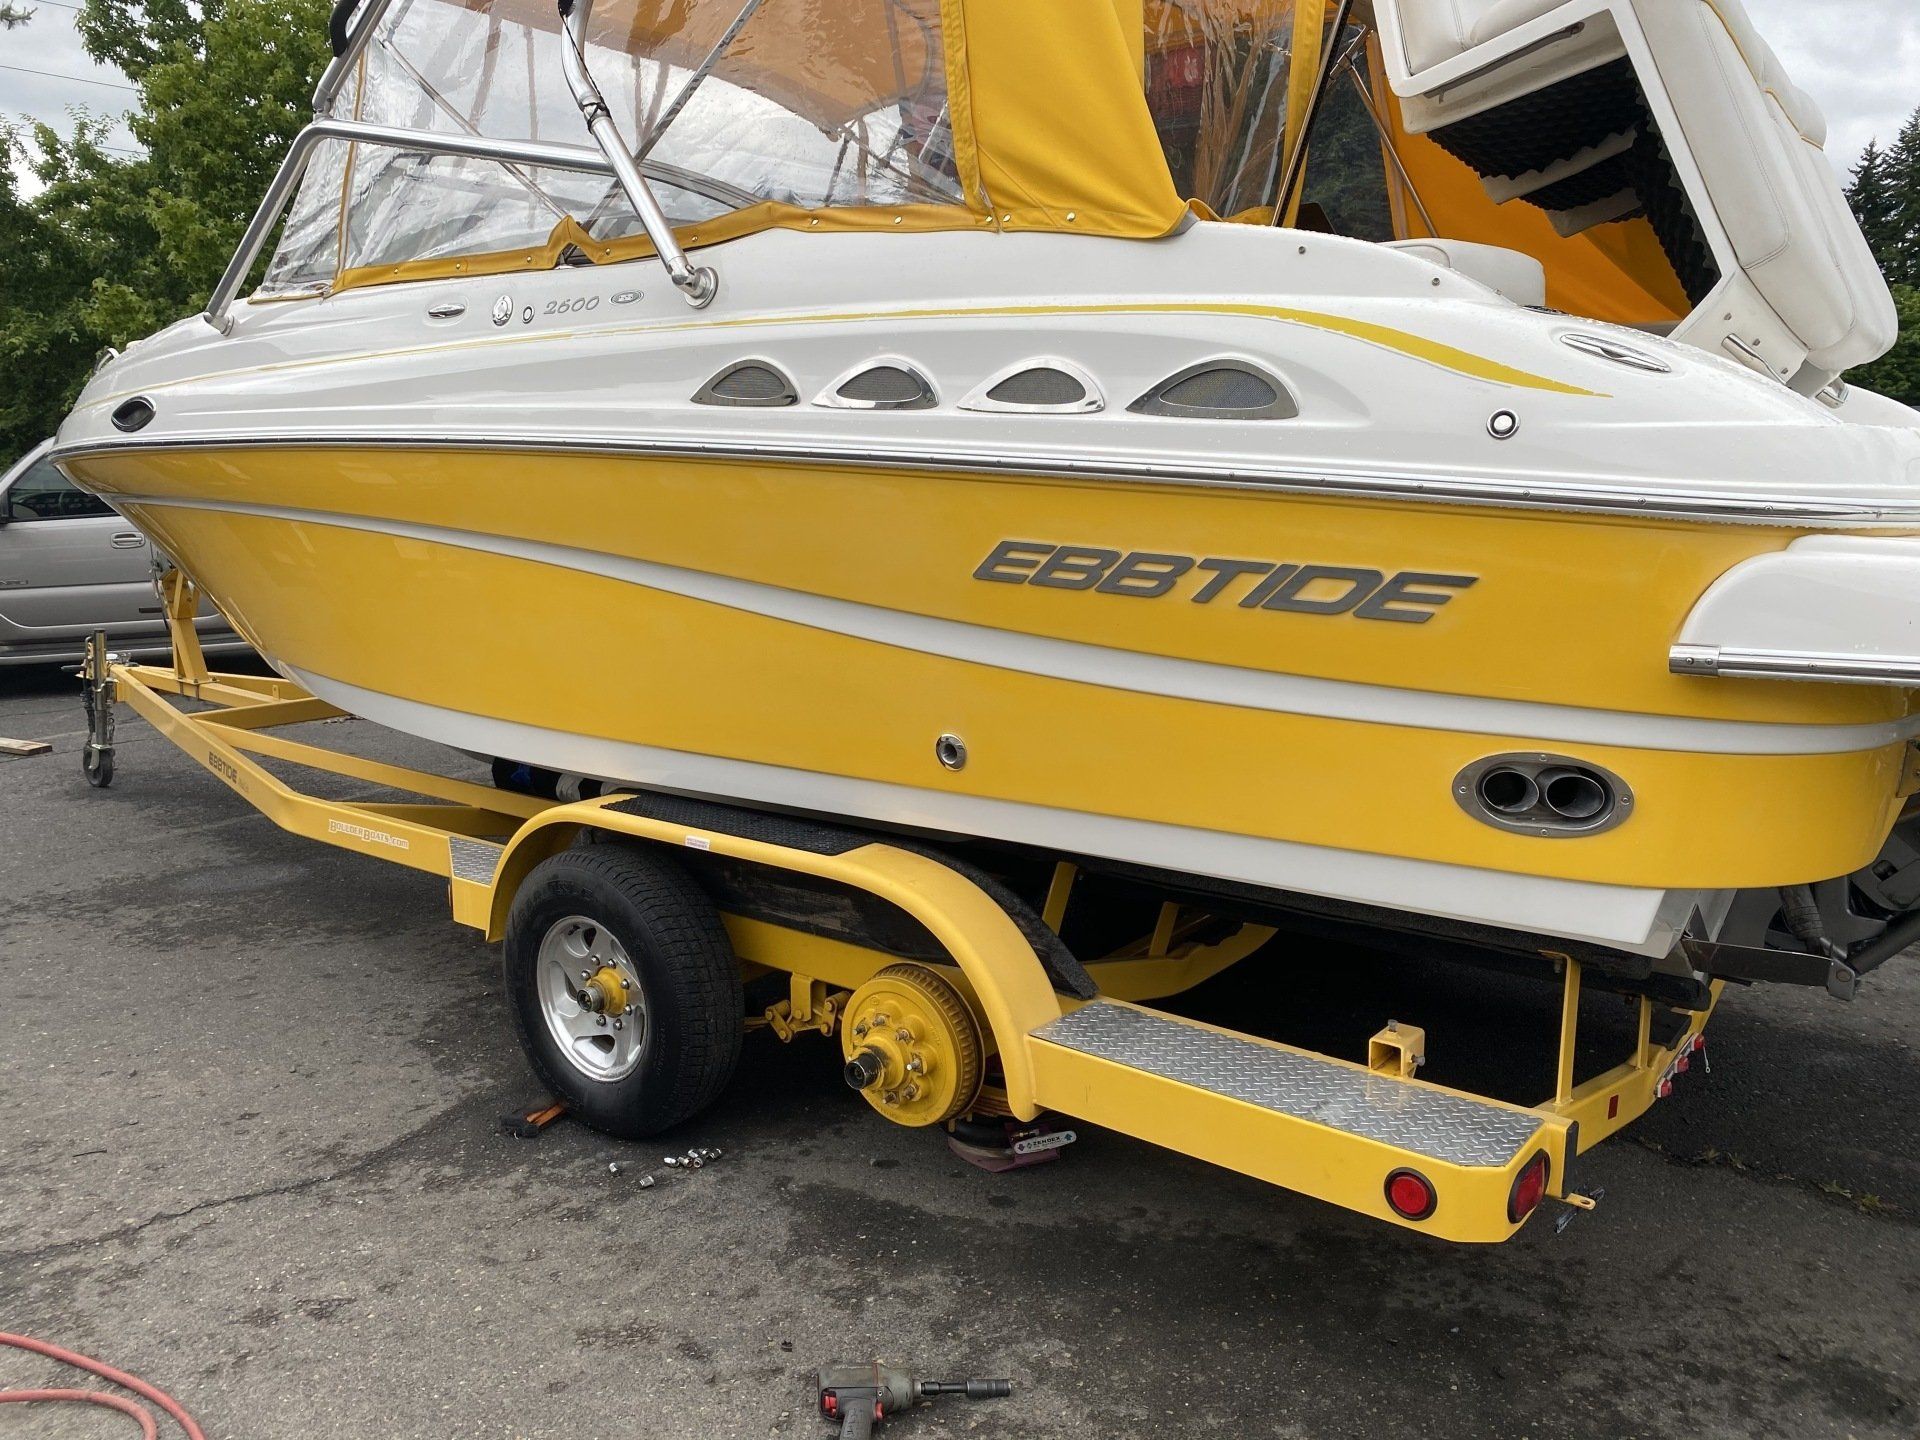 New tires on a yellow boat.